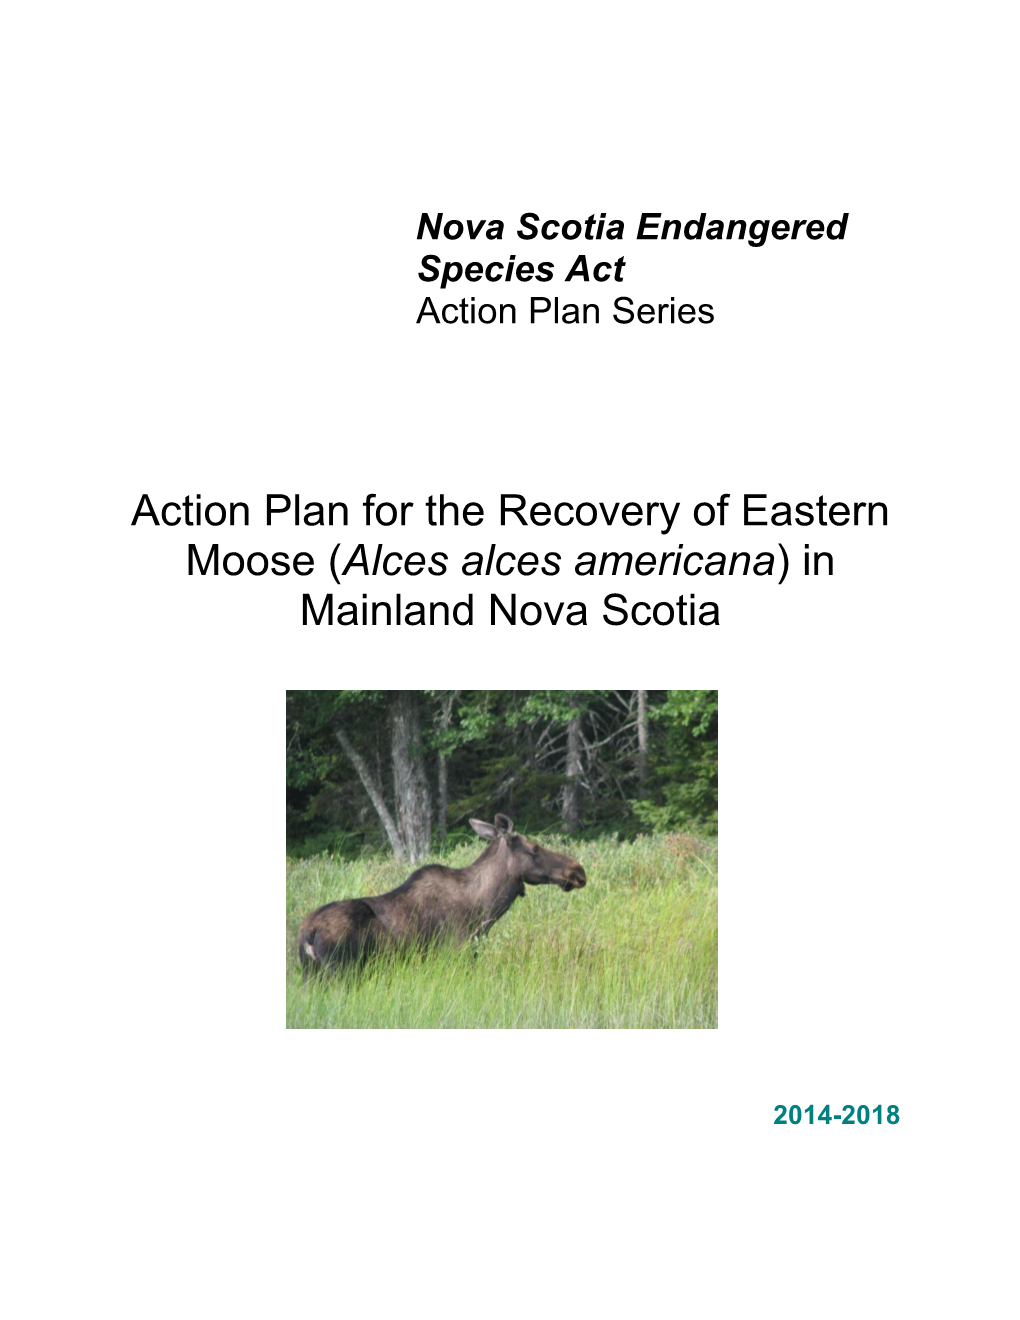 Action Plan for the Recovery of Eastern Moose (Alces Alces Americana) in Mainland Nova Scotia